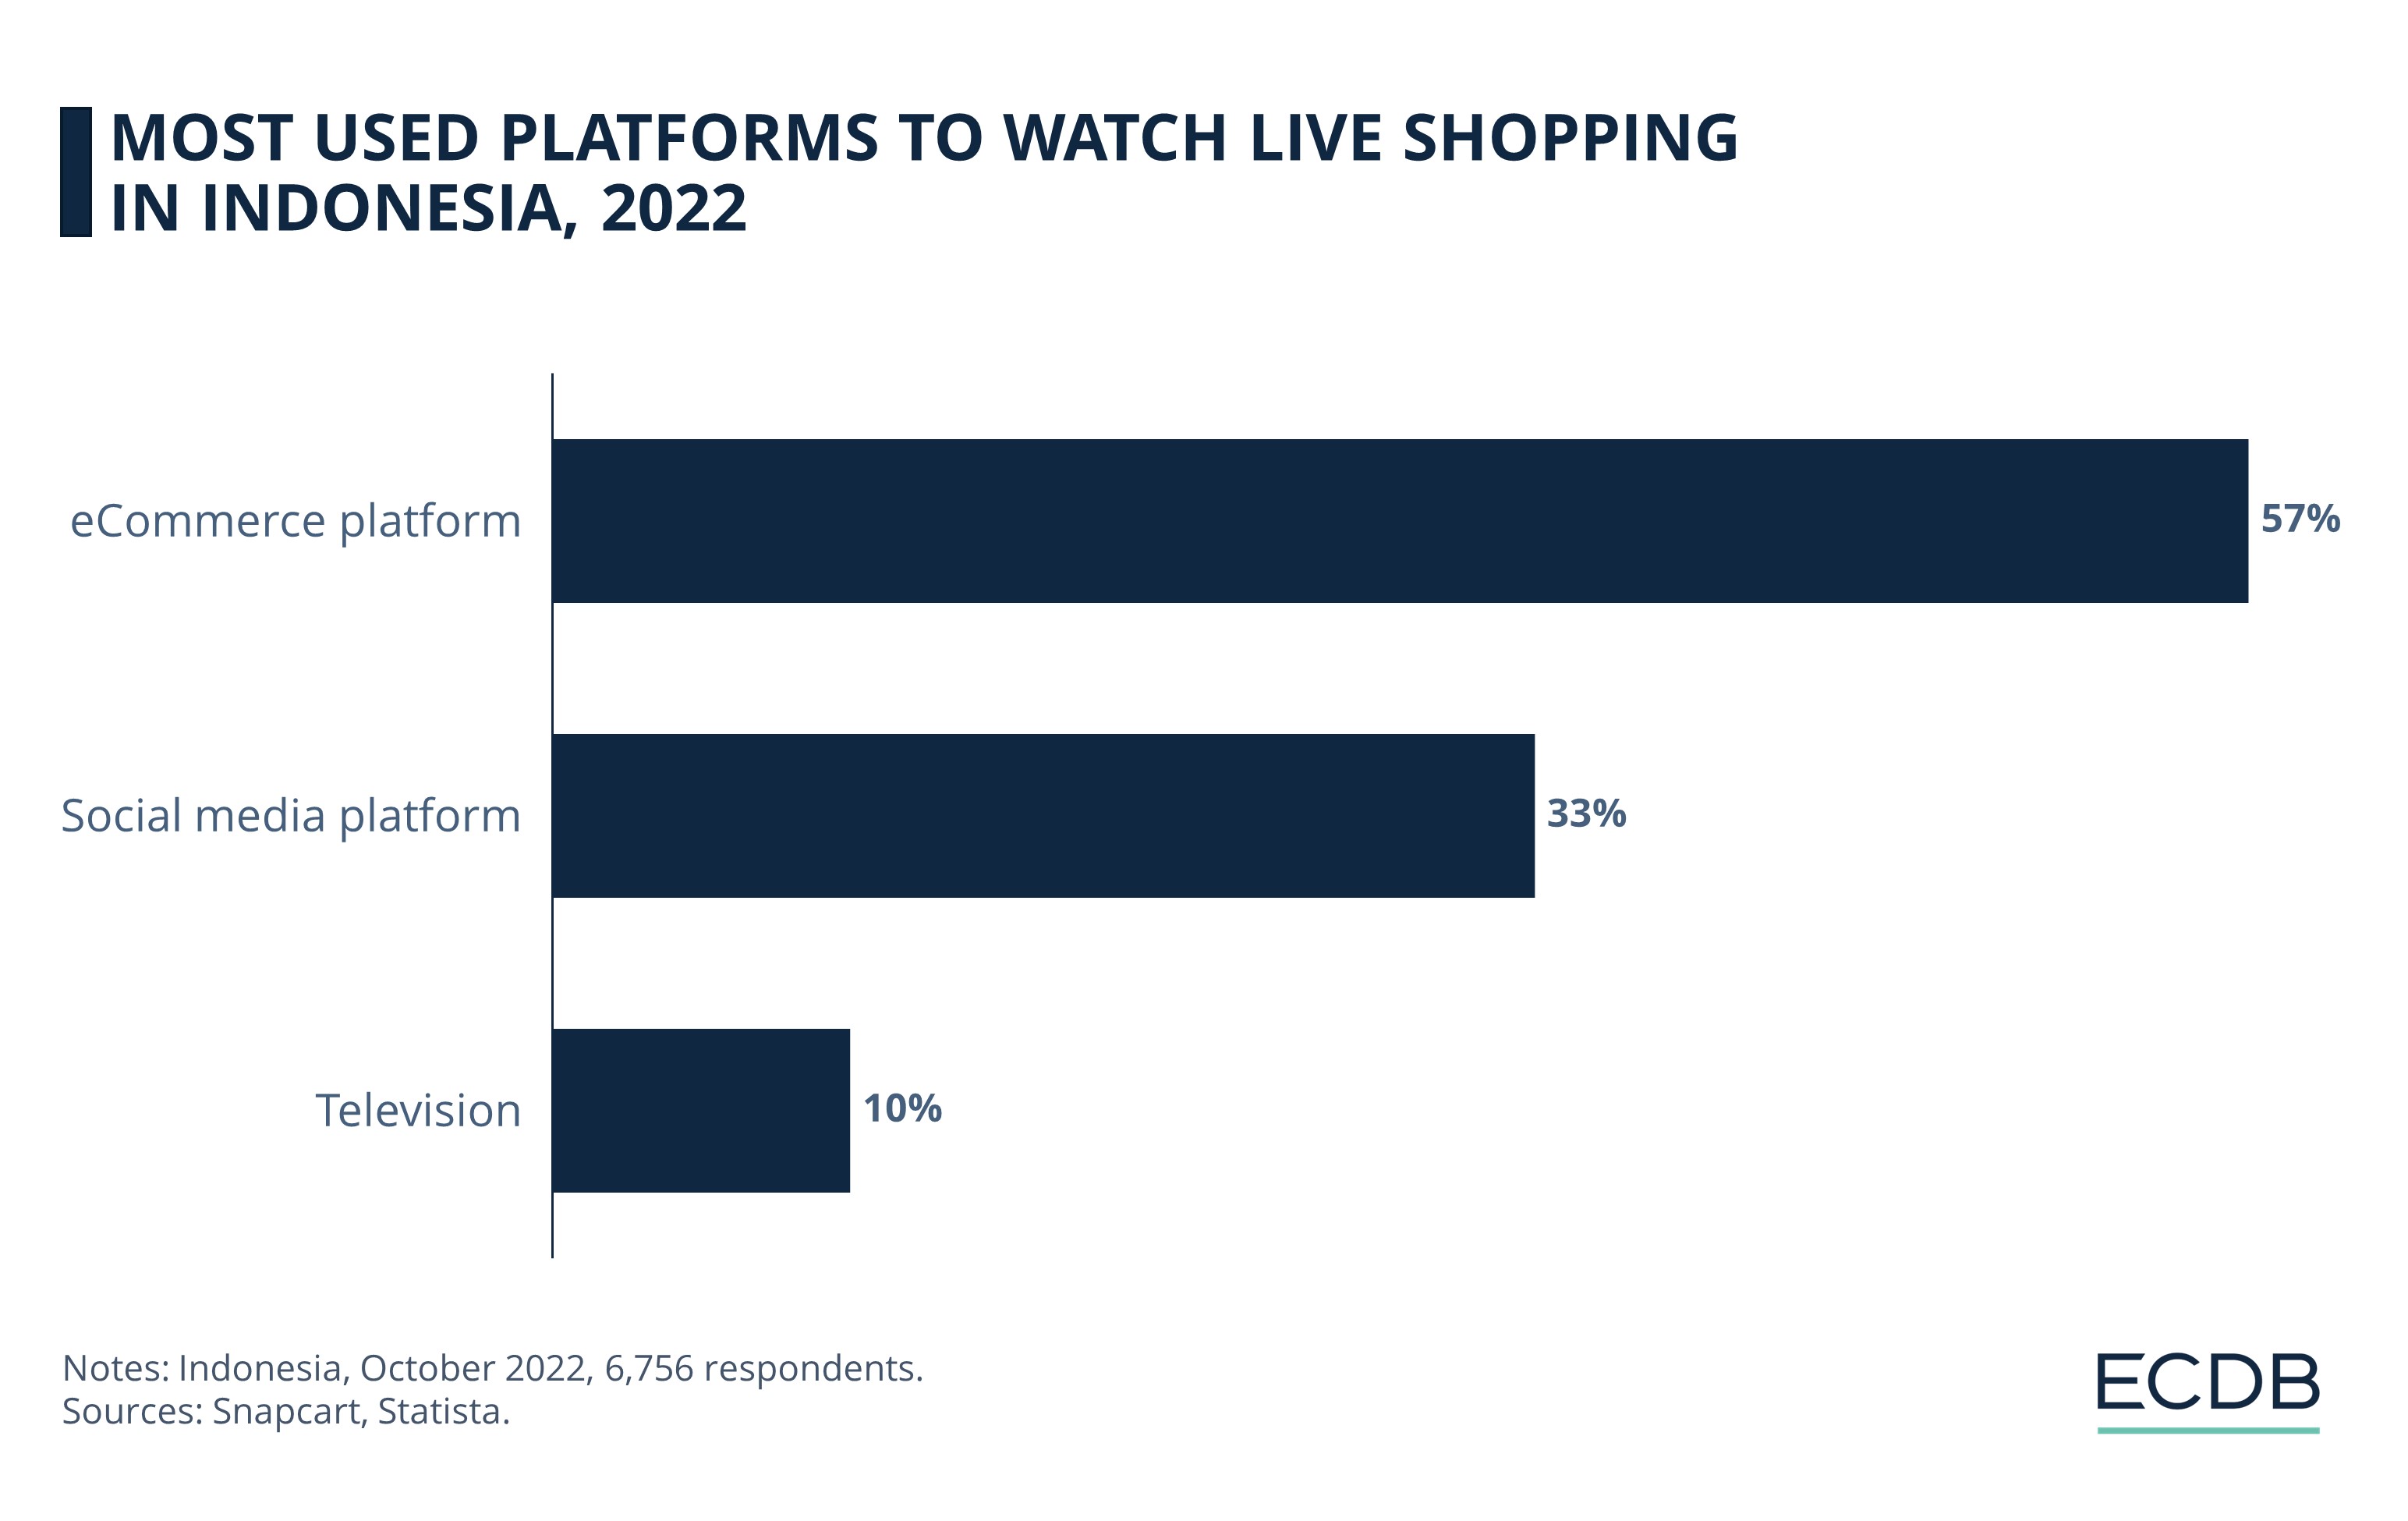 Most Used Platforms to Watch Live Shopping in Indonesia, 2022